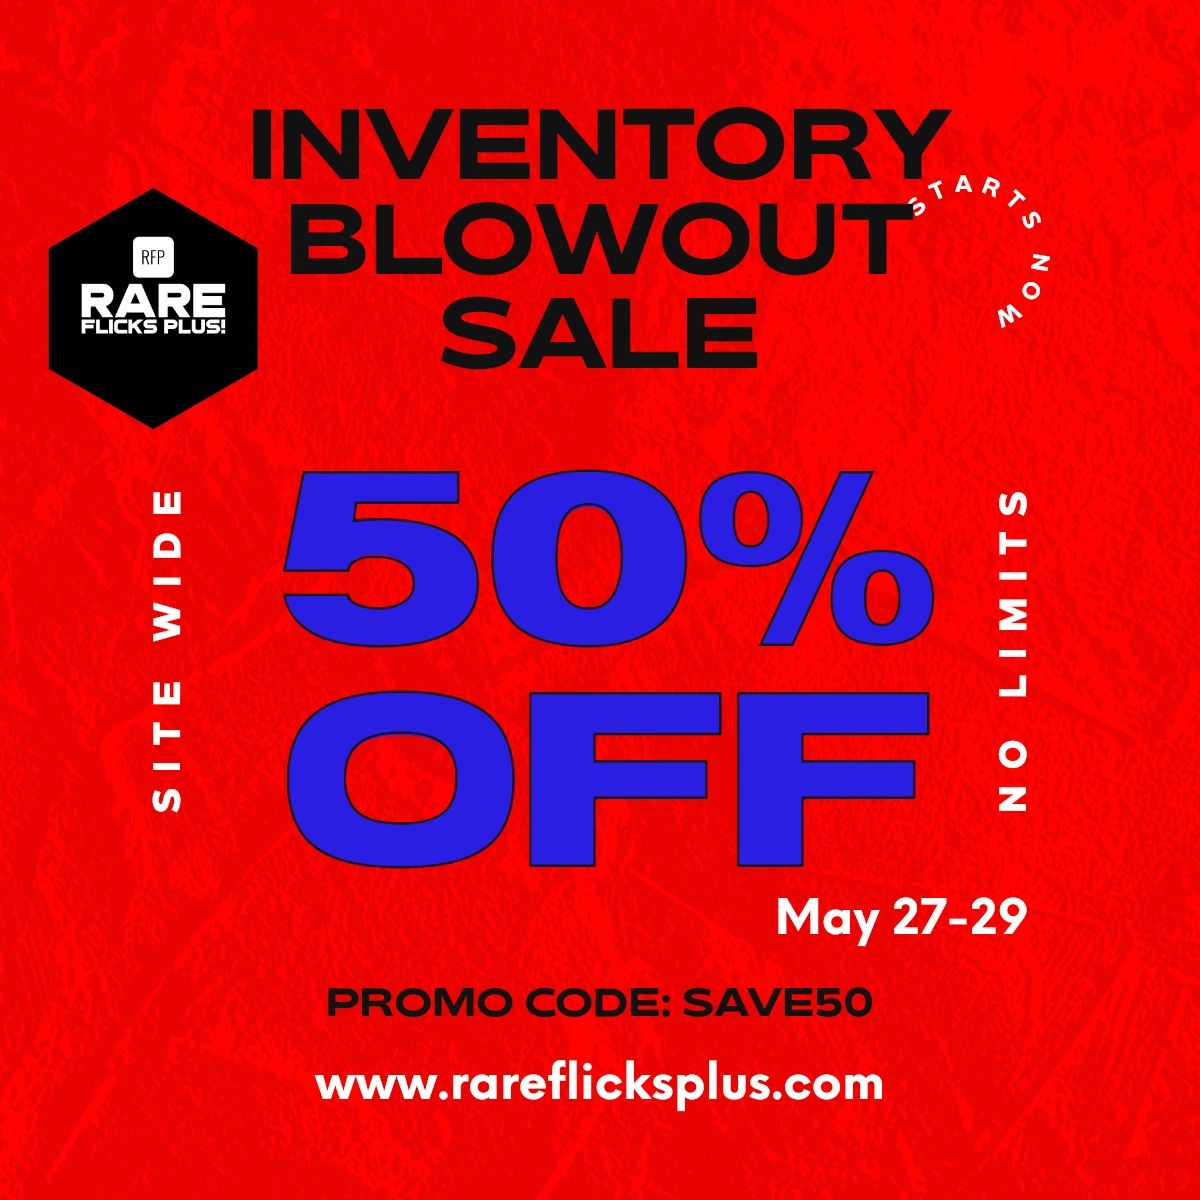 Inventory Blow Out Sale starts tomorrow!! 

SAVE 50% on all VHS, DVDs, Blu-Rays & more!!! Our biggest sale of the year!  

rareflicksplus.com

Use Coupon : SAVE50

#dvds #blurays #dvdsale #bluraysale #film #films #raredvds #oop #physicalmedia #films #dvdcollector